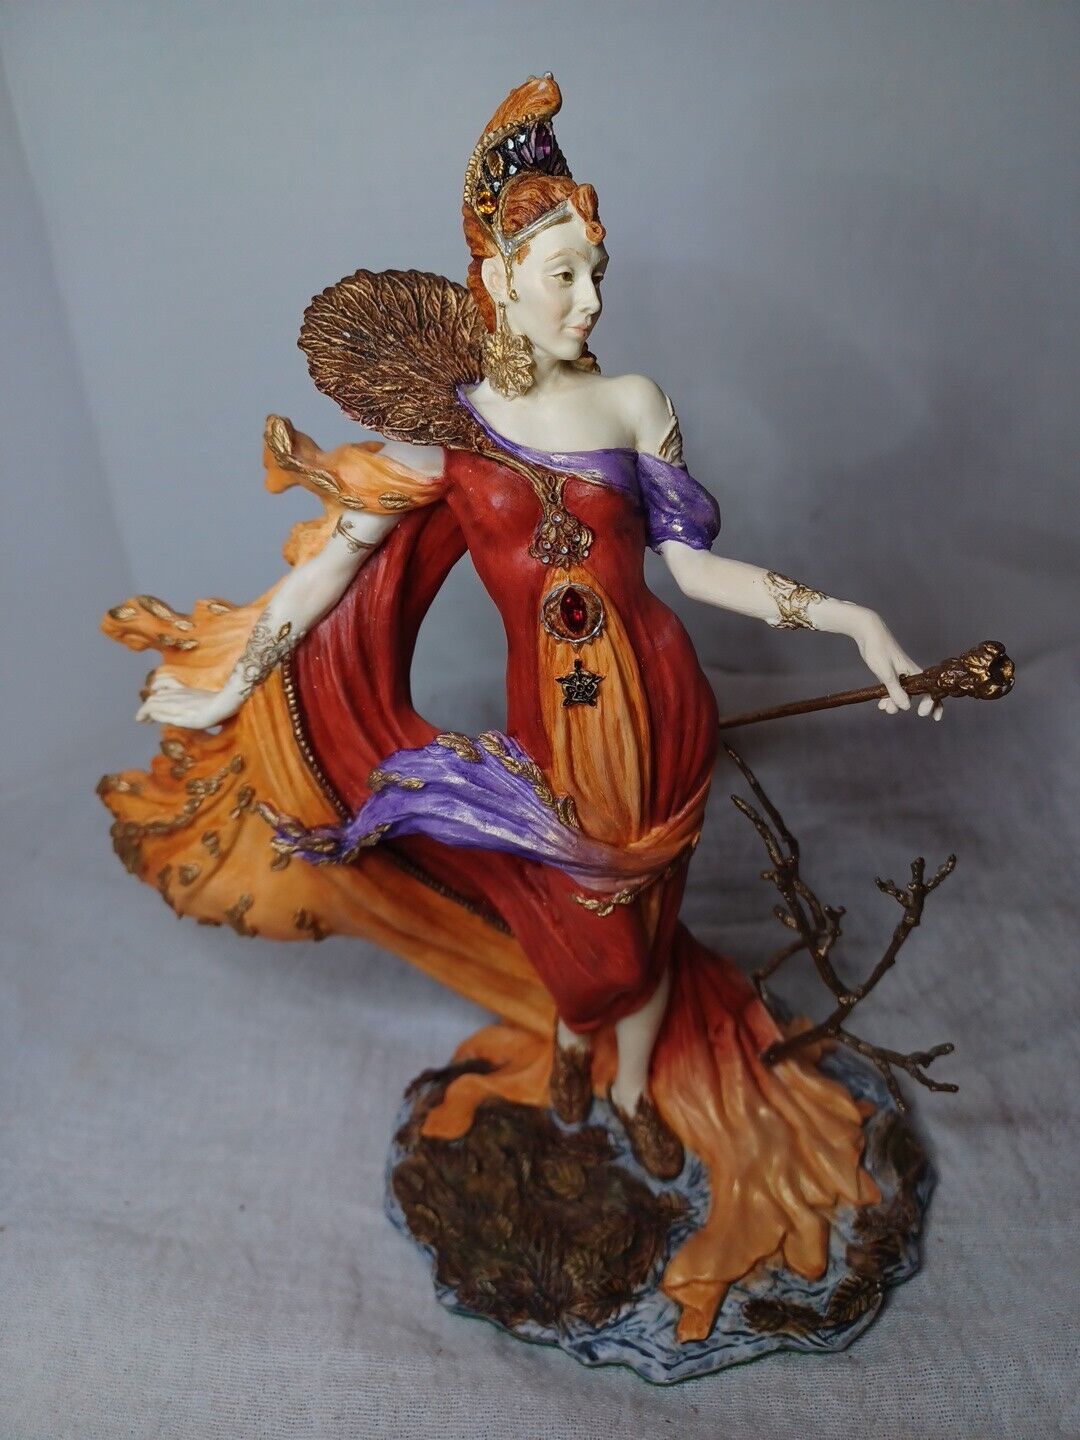 Enchantica Quillion 1998 (Autumn Witch) - Signed and numbered #0171 of 2950.